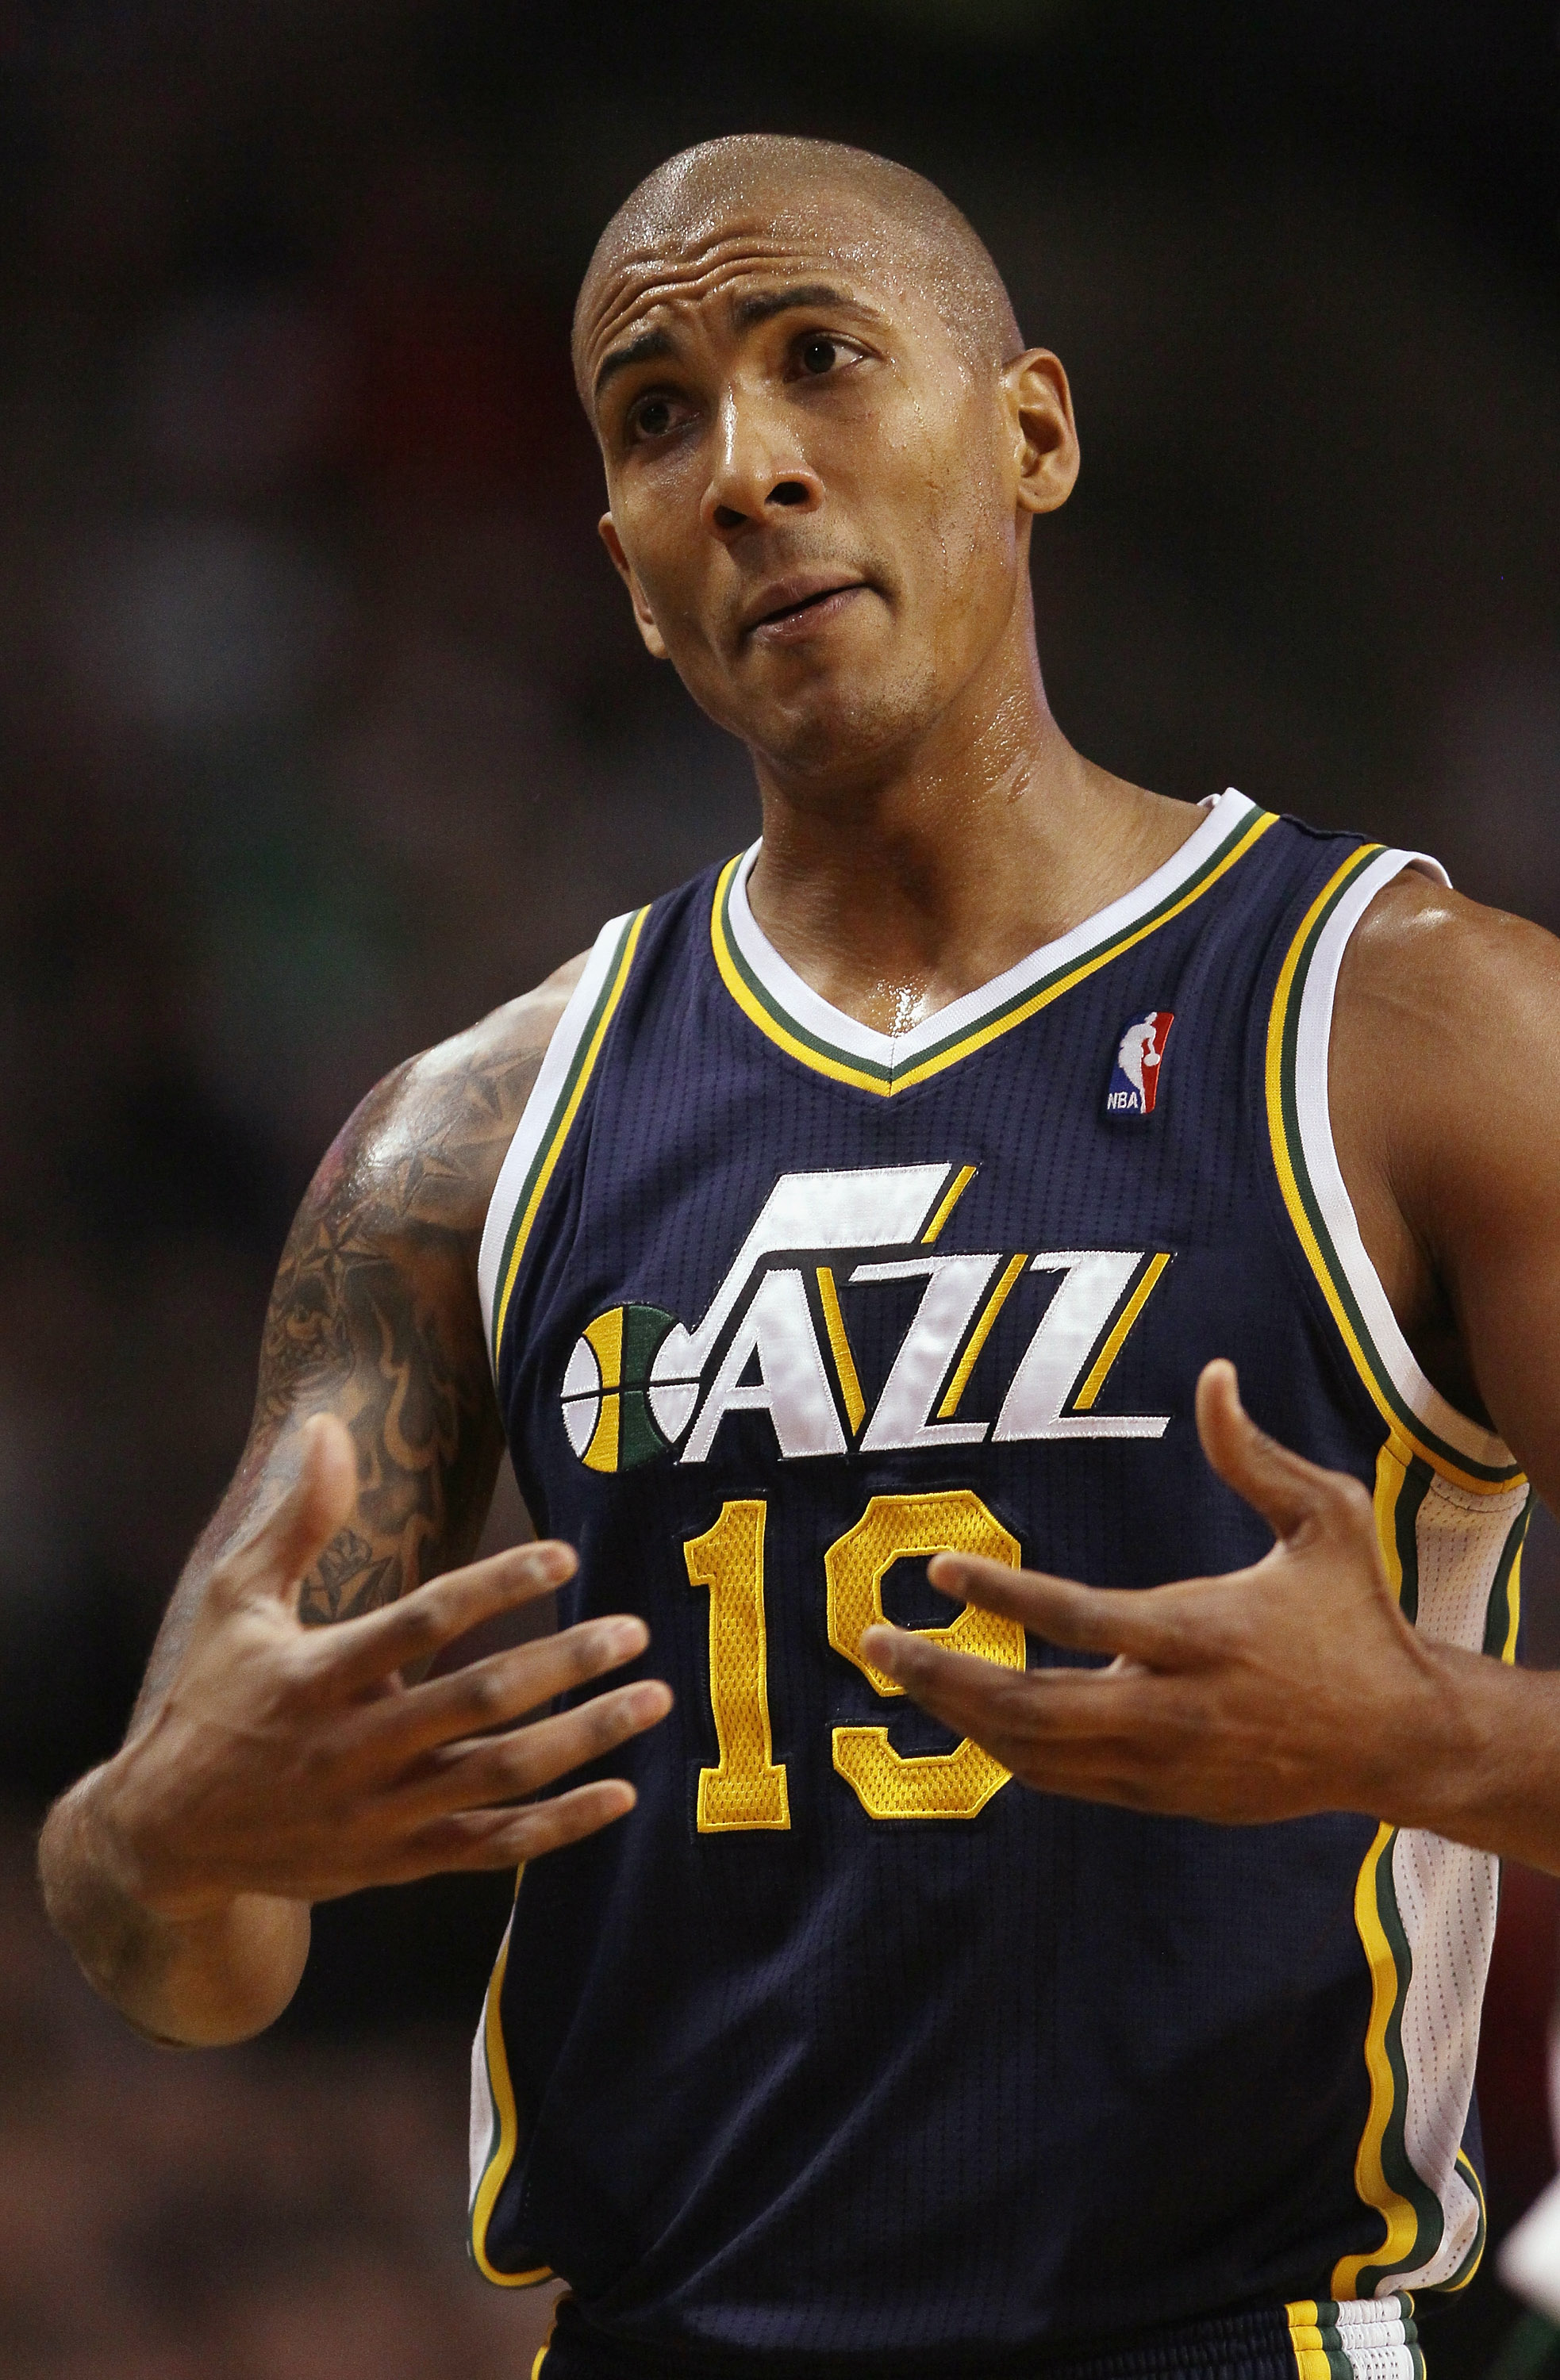 BOSTON, MA - JANUARY 21:  Raja Bell #19 of the Utah Jazz reacts after he is called for a foul in the first quarter against the Boston Celtics on January 21, 2011 at the TD Garden in Boston, Massachusetts.  NOTE TO USER: User expressly acknowledges and agr